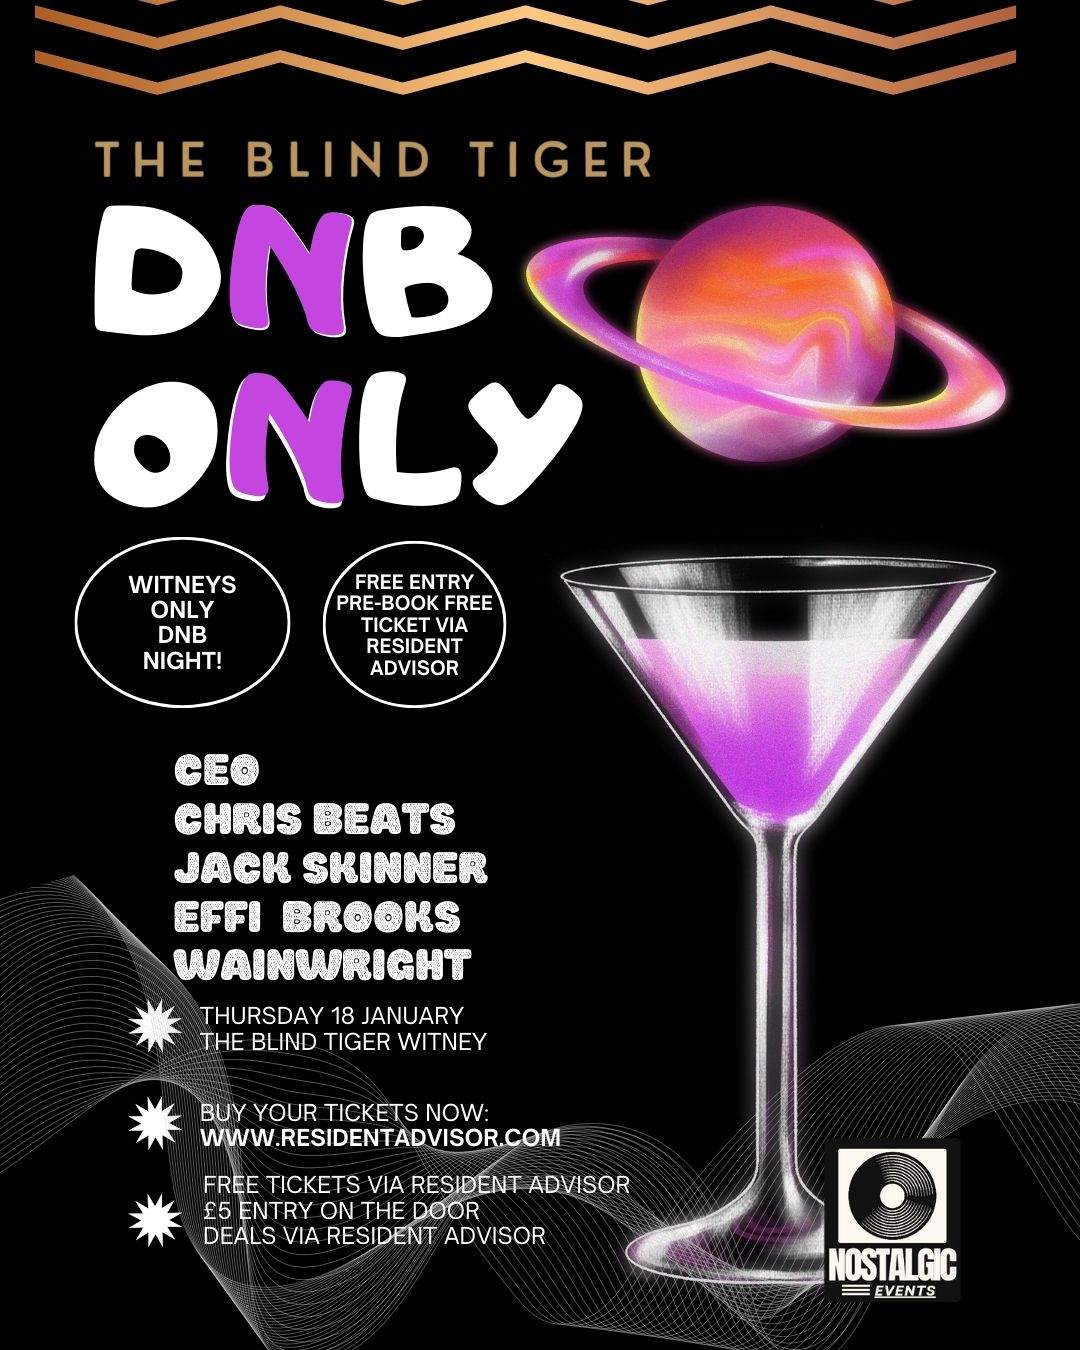 DNB ONLY (THE BLIND TIGER WITNEY) - フライヤー表